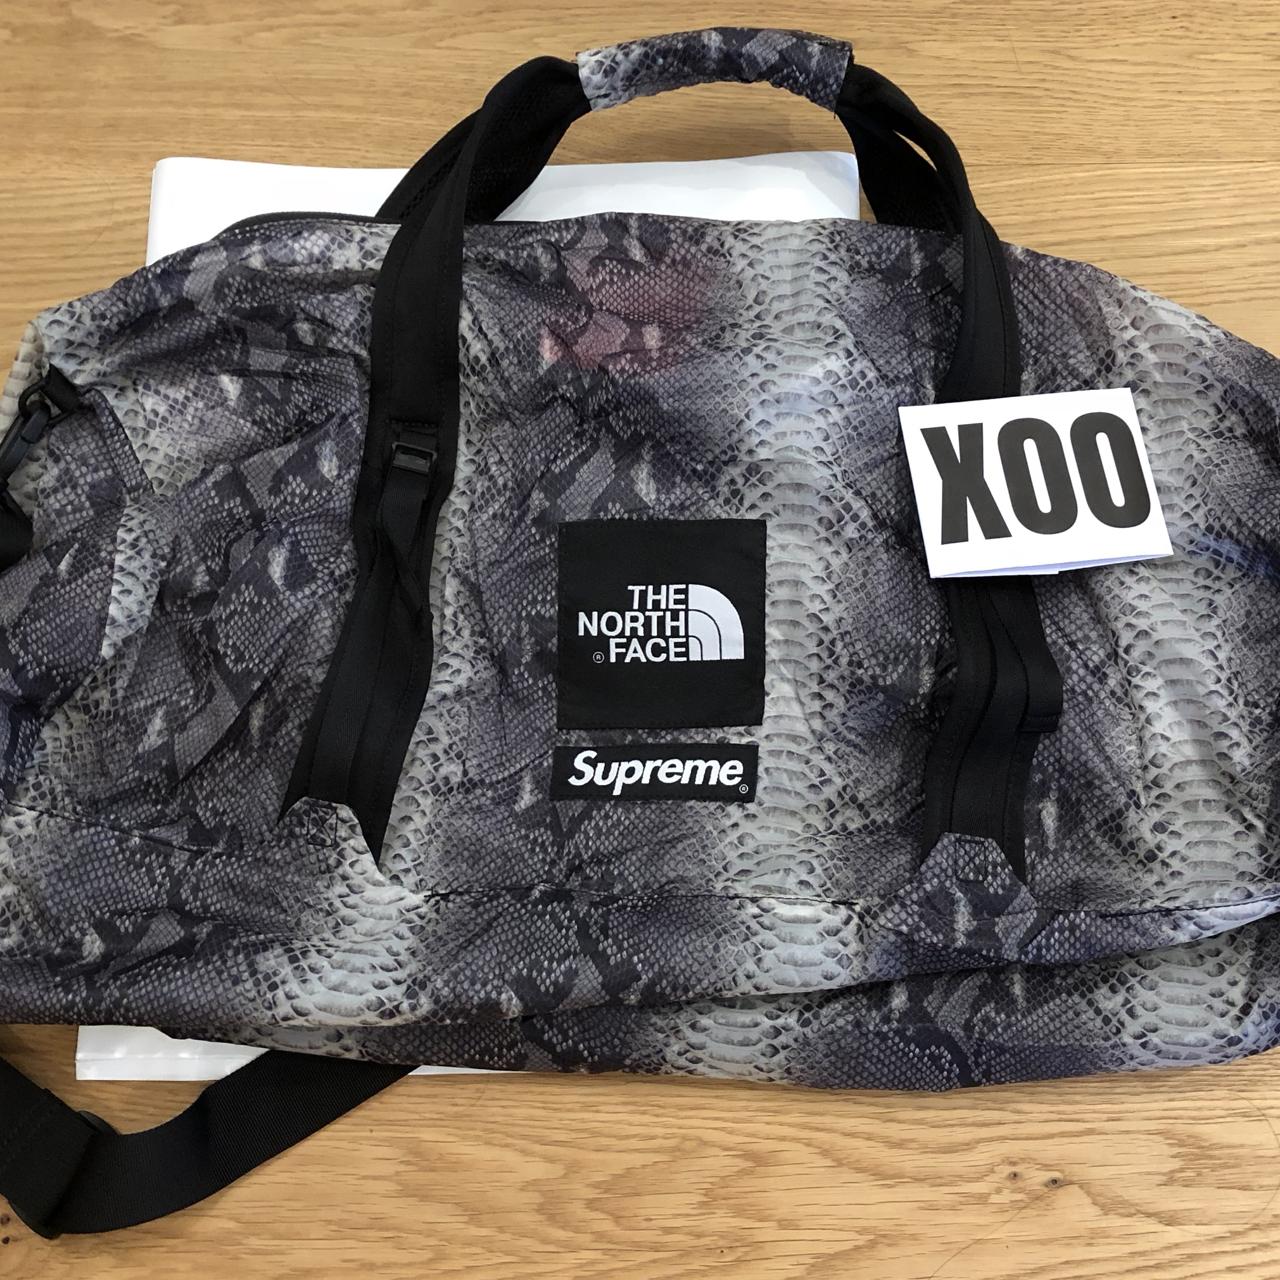 Supreme x North Face snakeskin flyweight duffle...